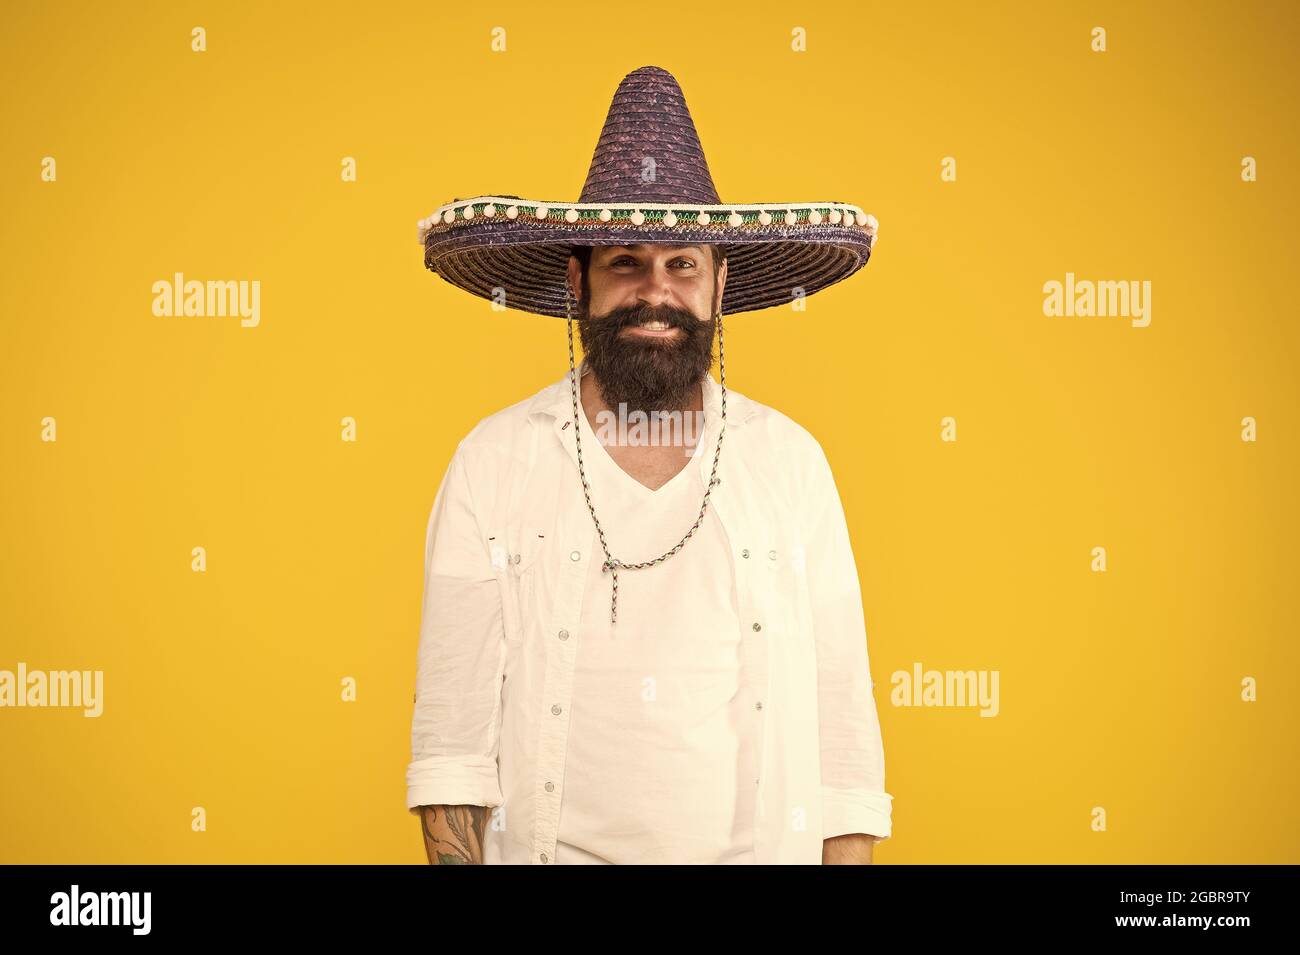 National holidays. Summer festival. Mexican hat sombrero. Guy happy ...